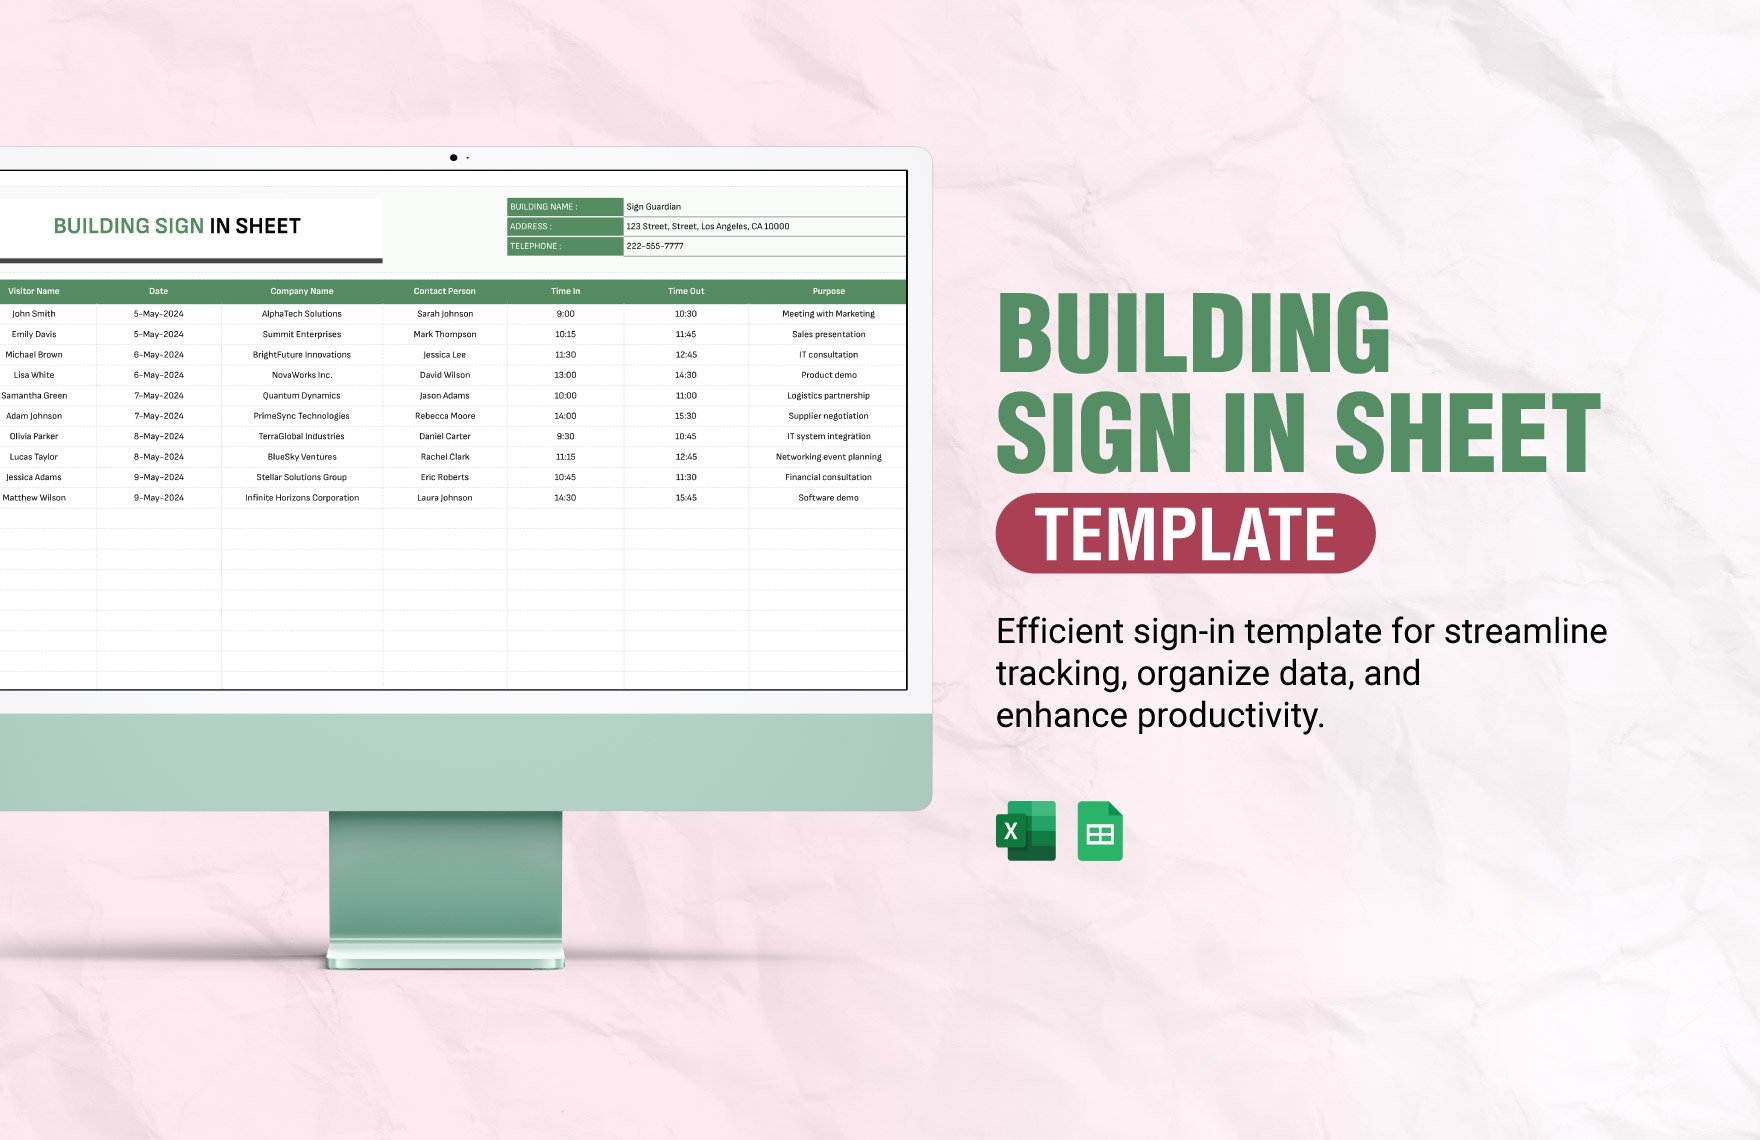 Building Sign in Sheet Template